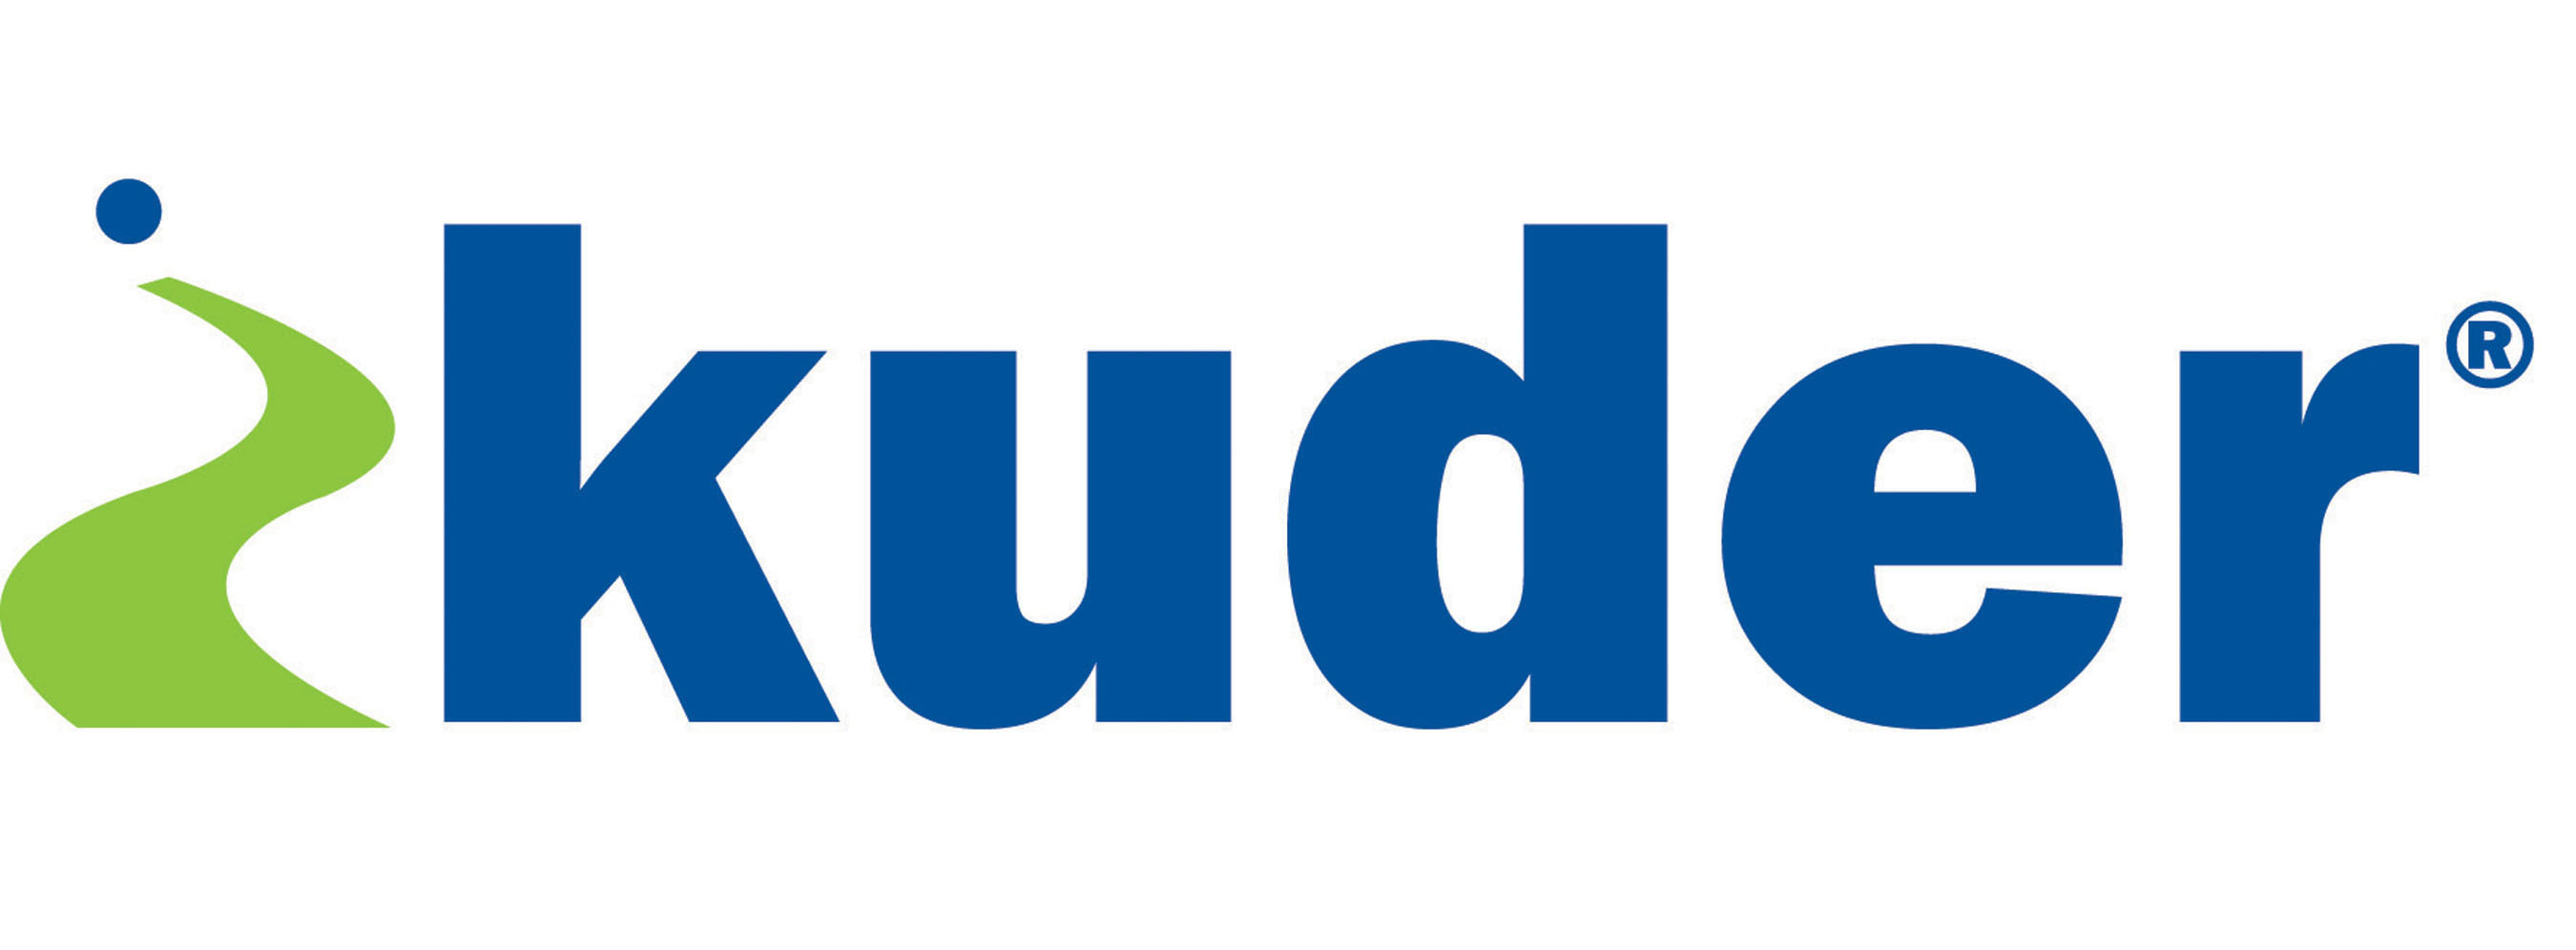 Kuder, Inc. is a leading provider of Internet-based tools and resources that help students and adults achieve their educational and career planning goals. Our mission is to raise student aspirations and to provide career options to students and adults through self-assessment and education. Visit  www.kuder.com for more information or call 800-314-8972. (PRNewsFoto/Kuder, Inc.) (PRNewsFoto/)